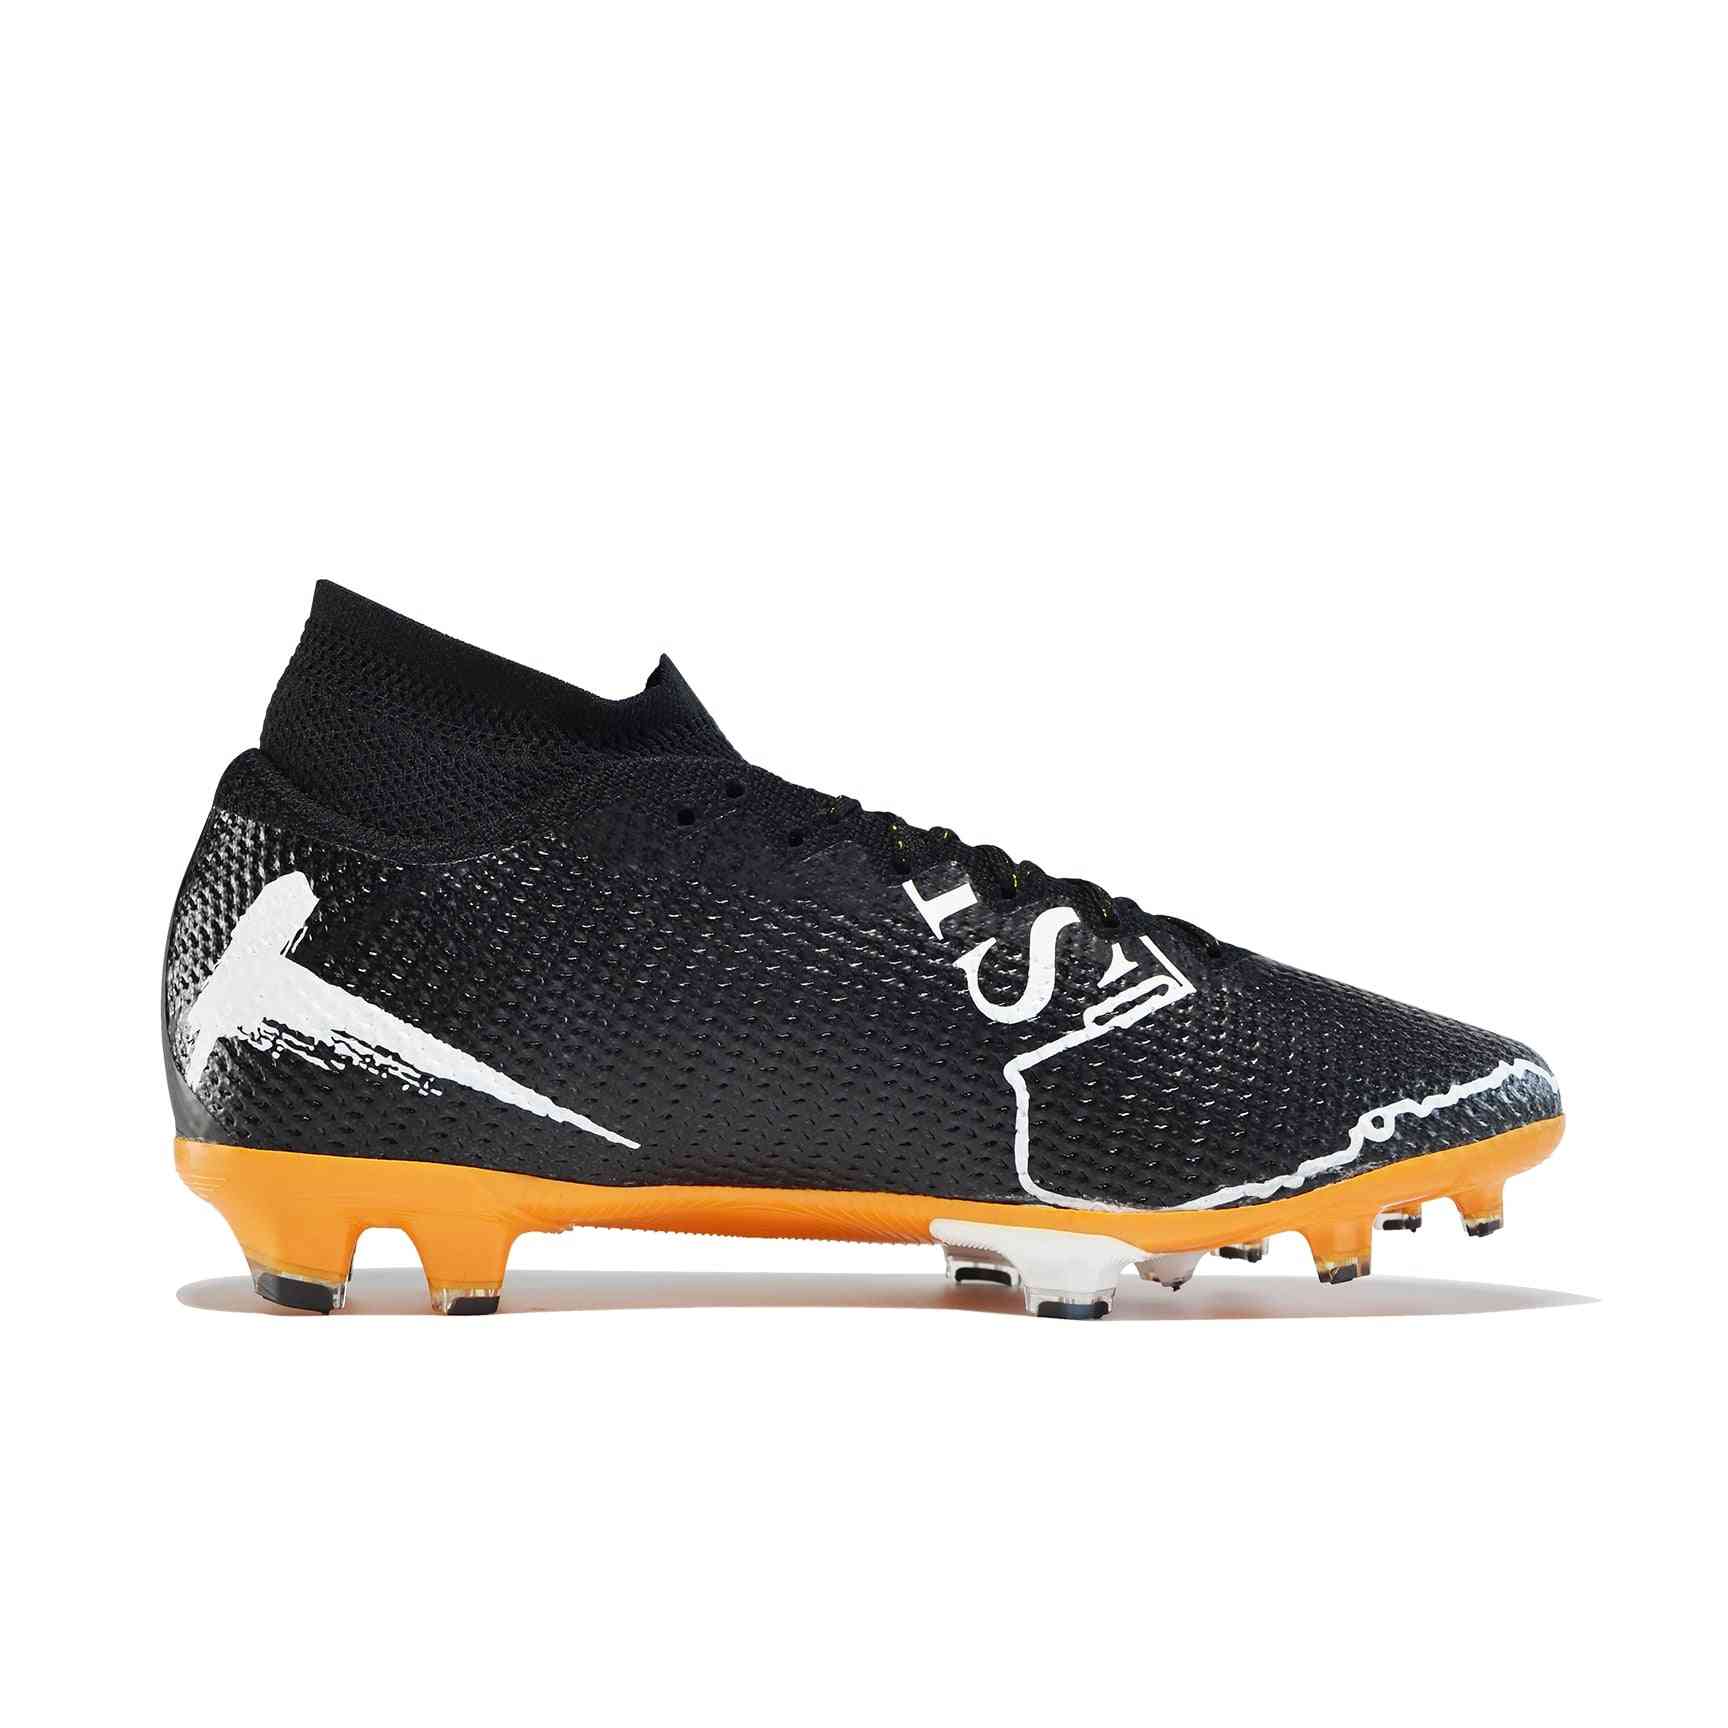 Soccer Shoes, Adult Classic Football Shoe